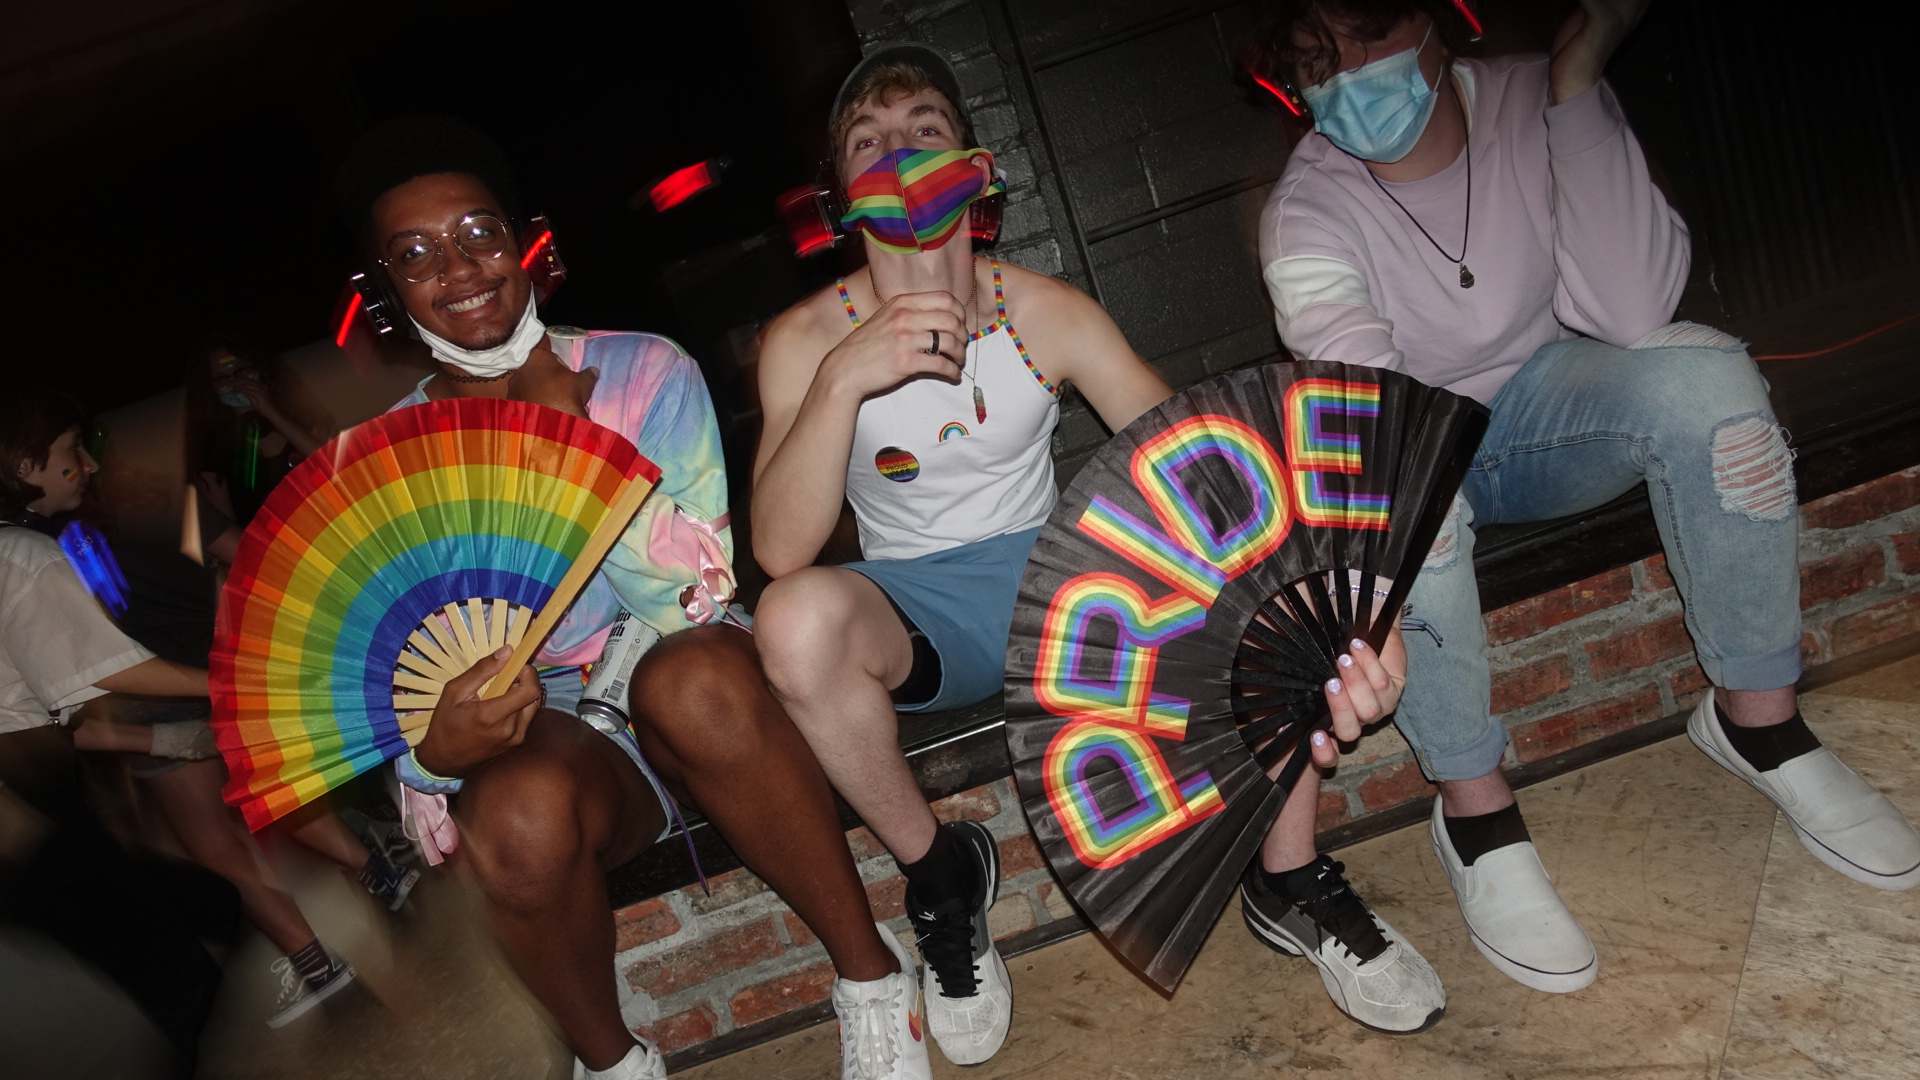 Teens in rainbow masks hold rainbow fans with rainbow pins. The background is blurry and distorted, as if taken in motion.